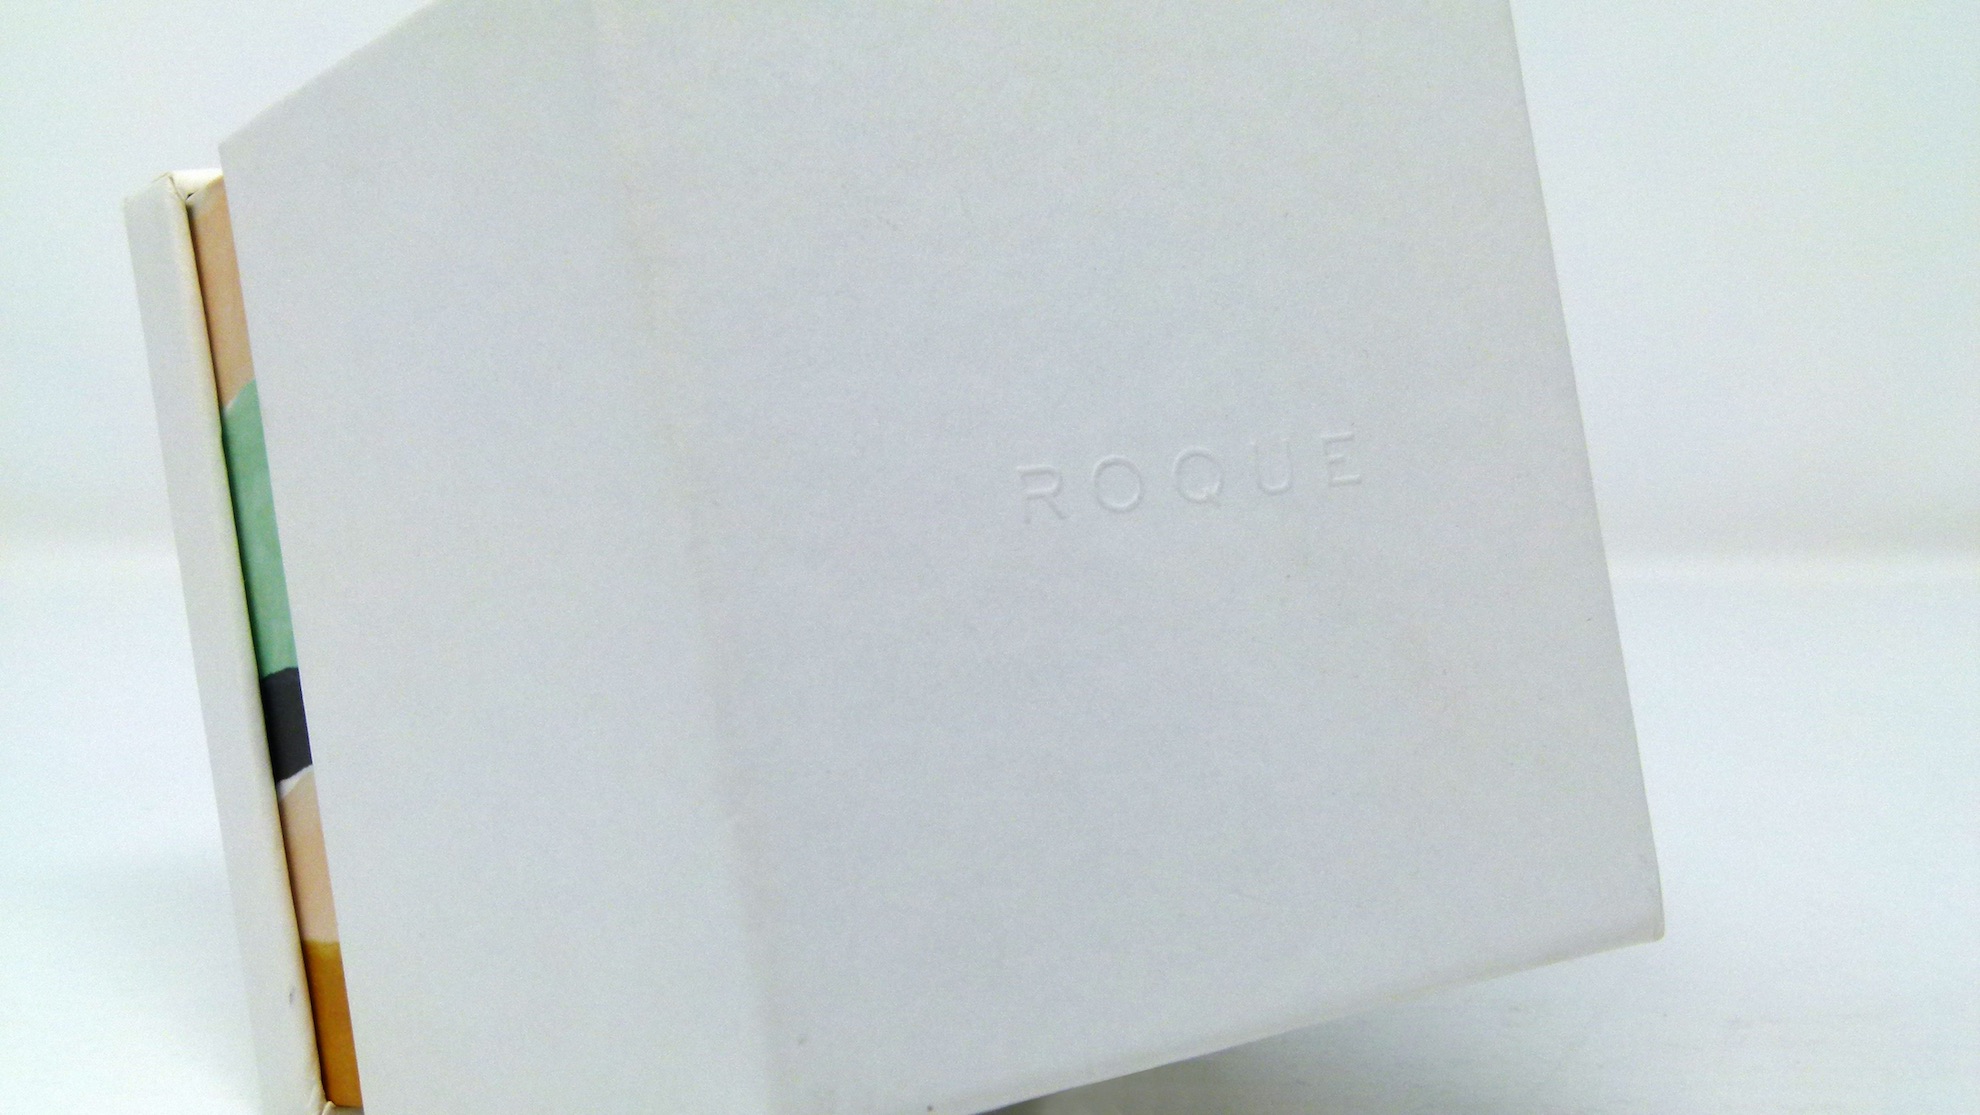 Sustainable Packaging Design: Roque Jewelry - PaperSpecs